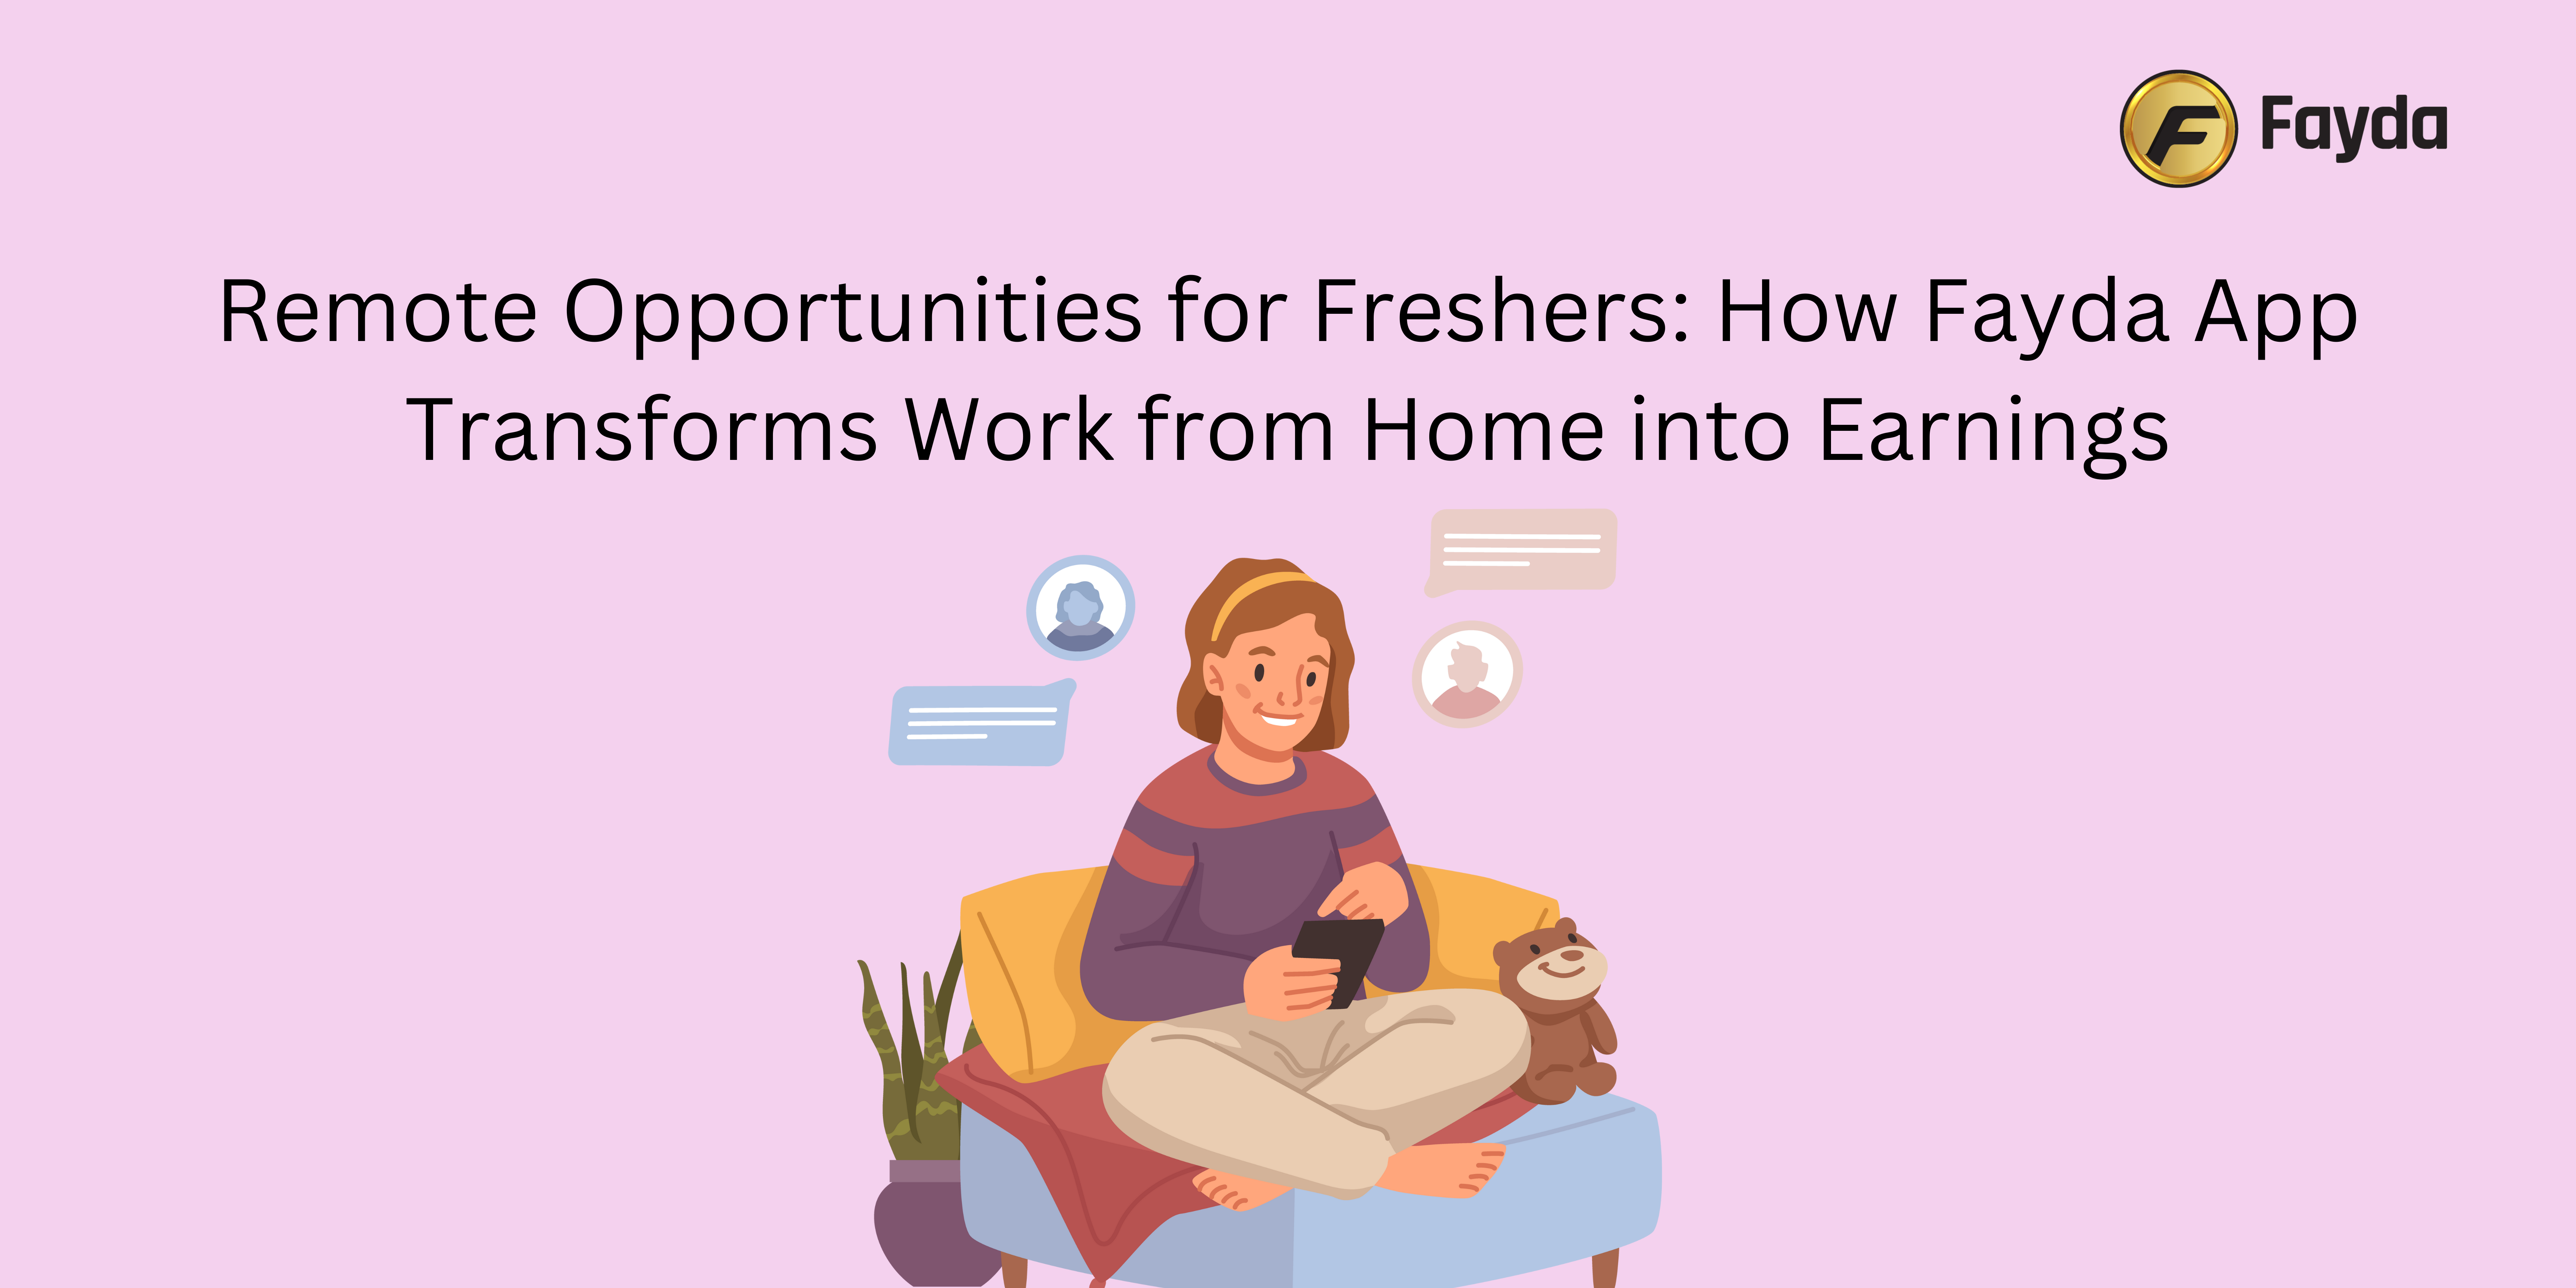 Remote Opportunities for Freshers: How Fayda App Transforms Work from Home into Earnings